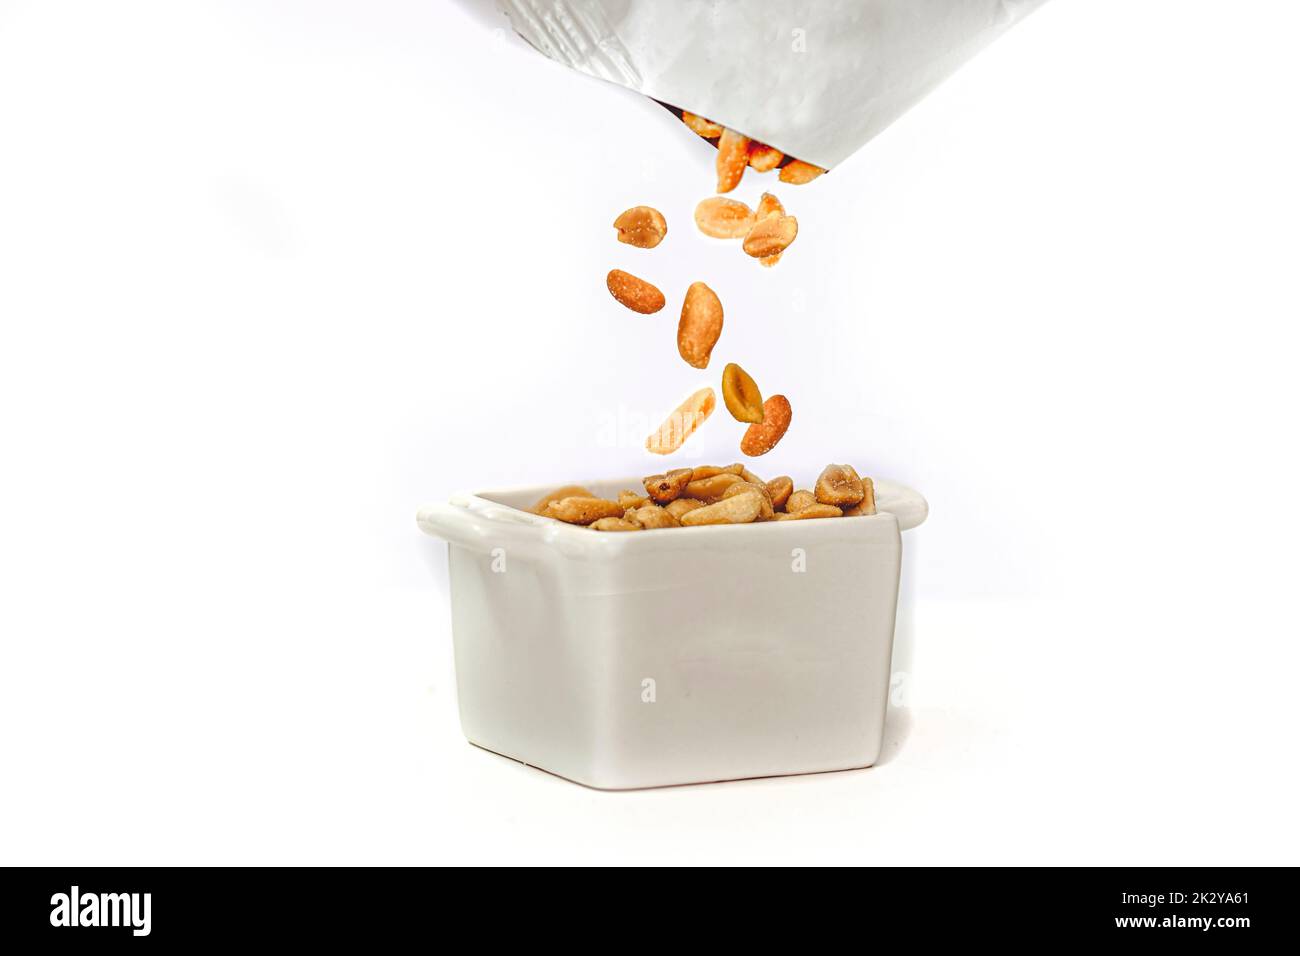 Salted peanuts falling out of a packet into a pot full of peanuts.  Isolated against white background Stock Photo